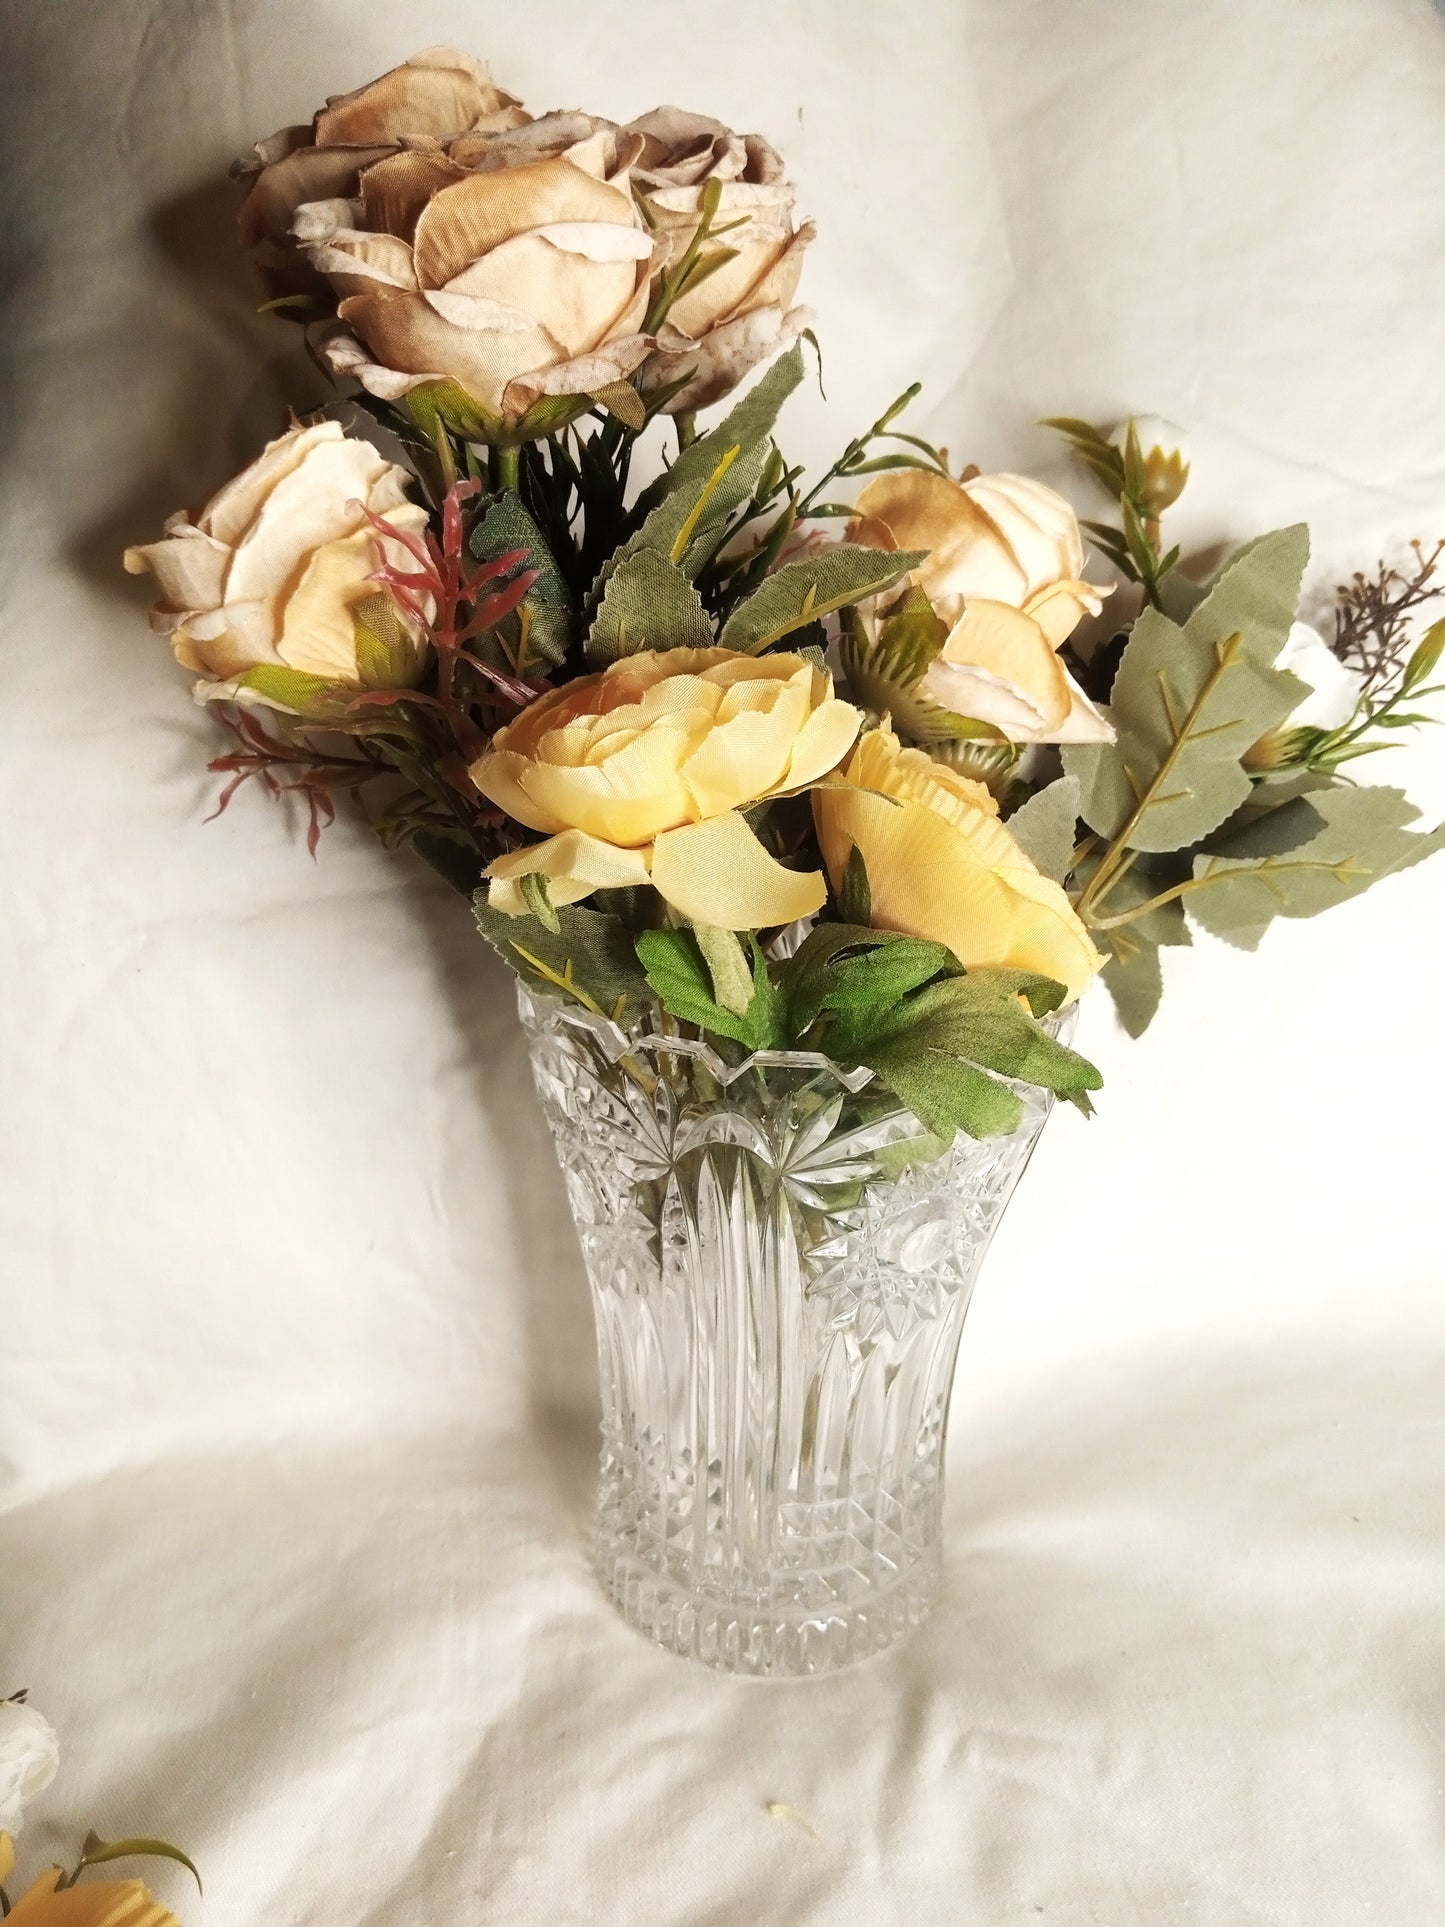 Artificial Flowers With A Glass Jar (about 6 inches tall)